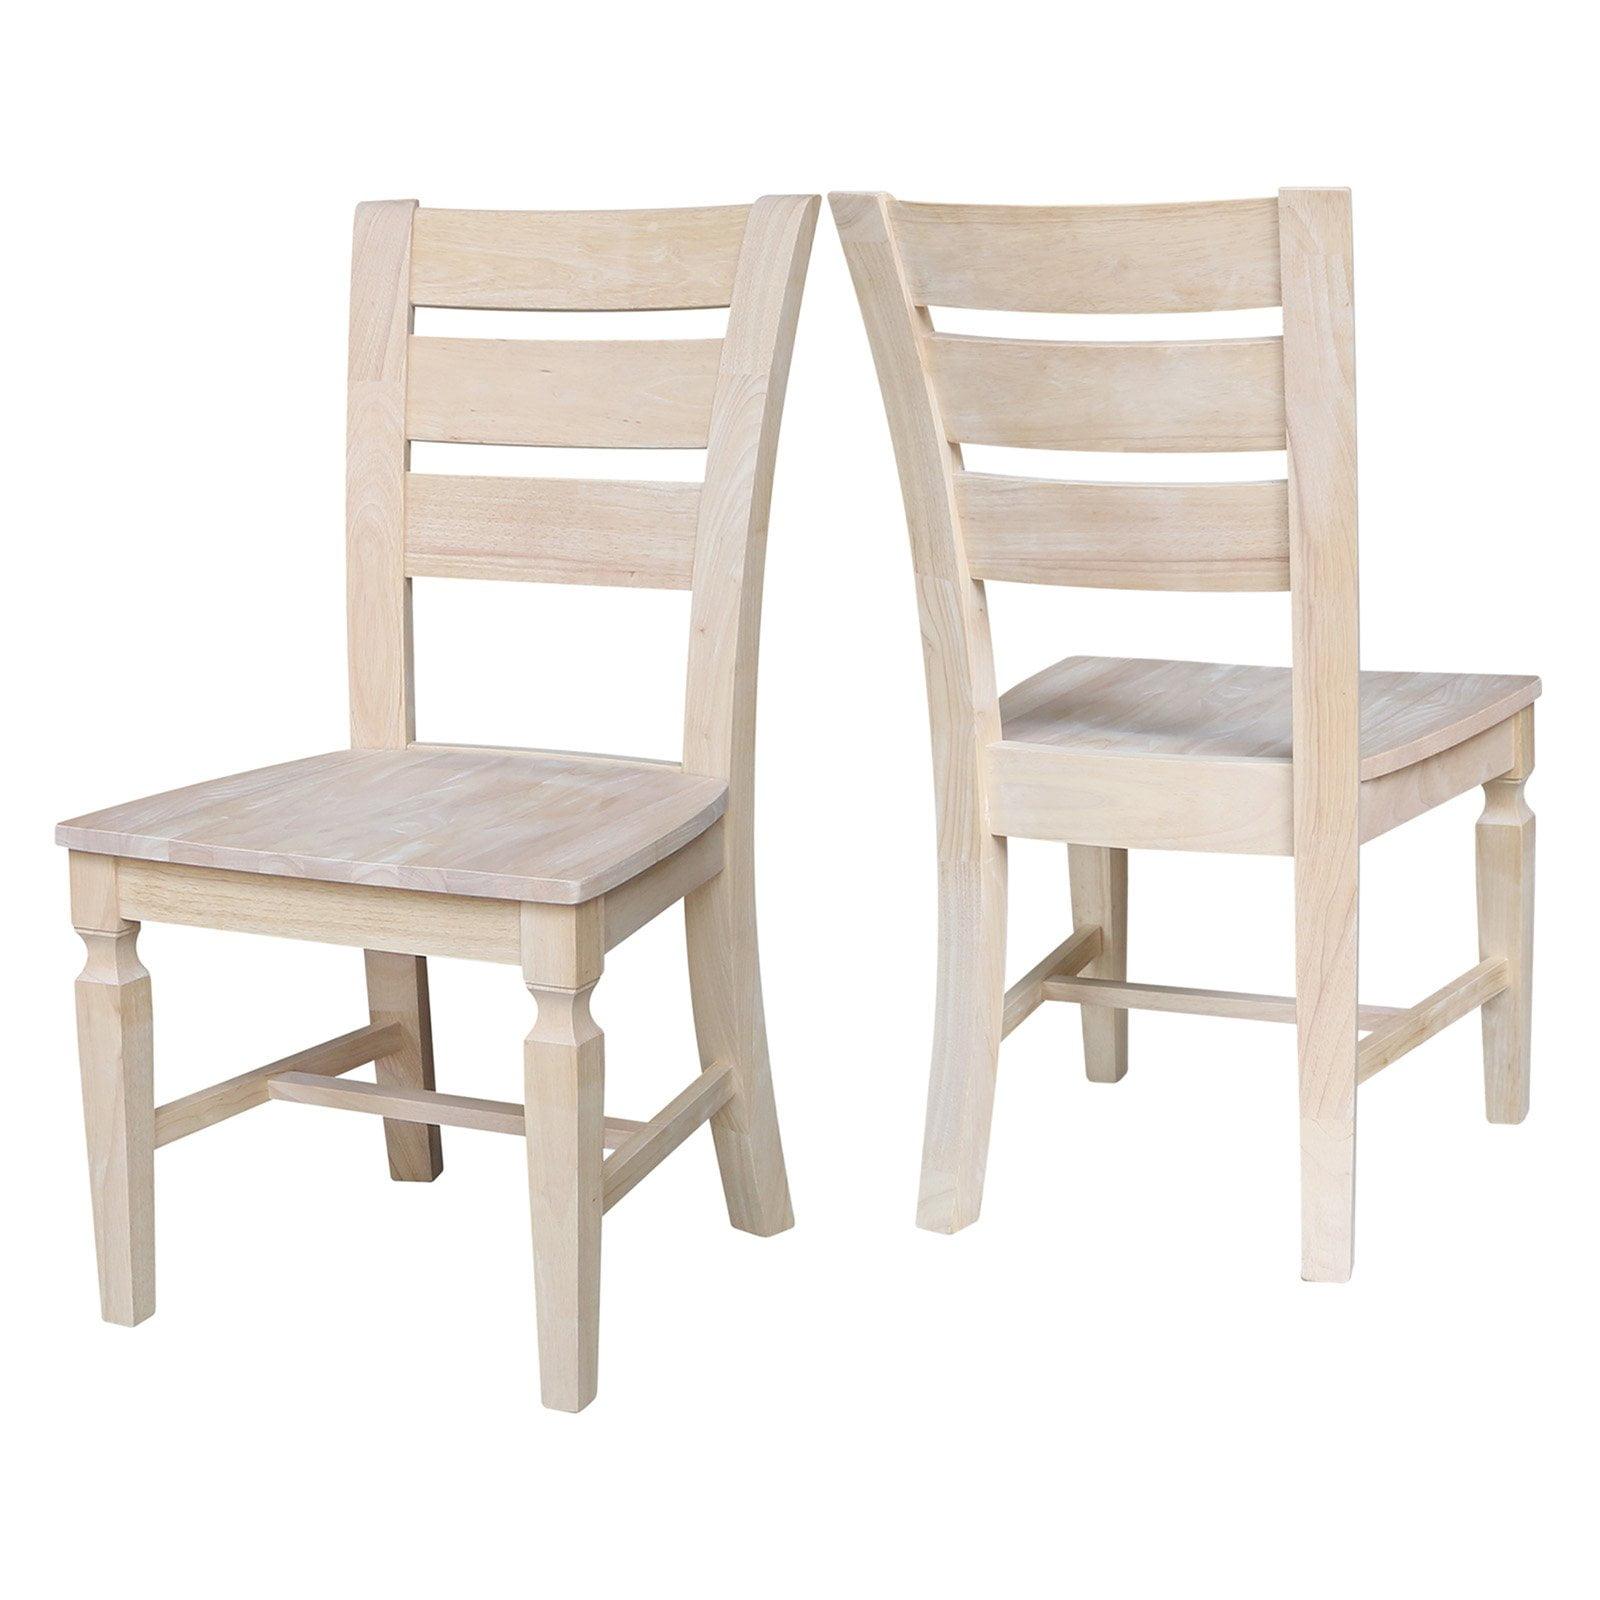 Vista Unfinished Solid Parawood High Ladderback Chair Set